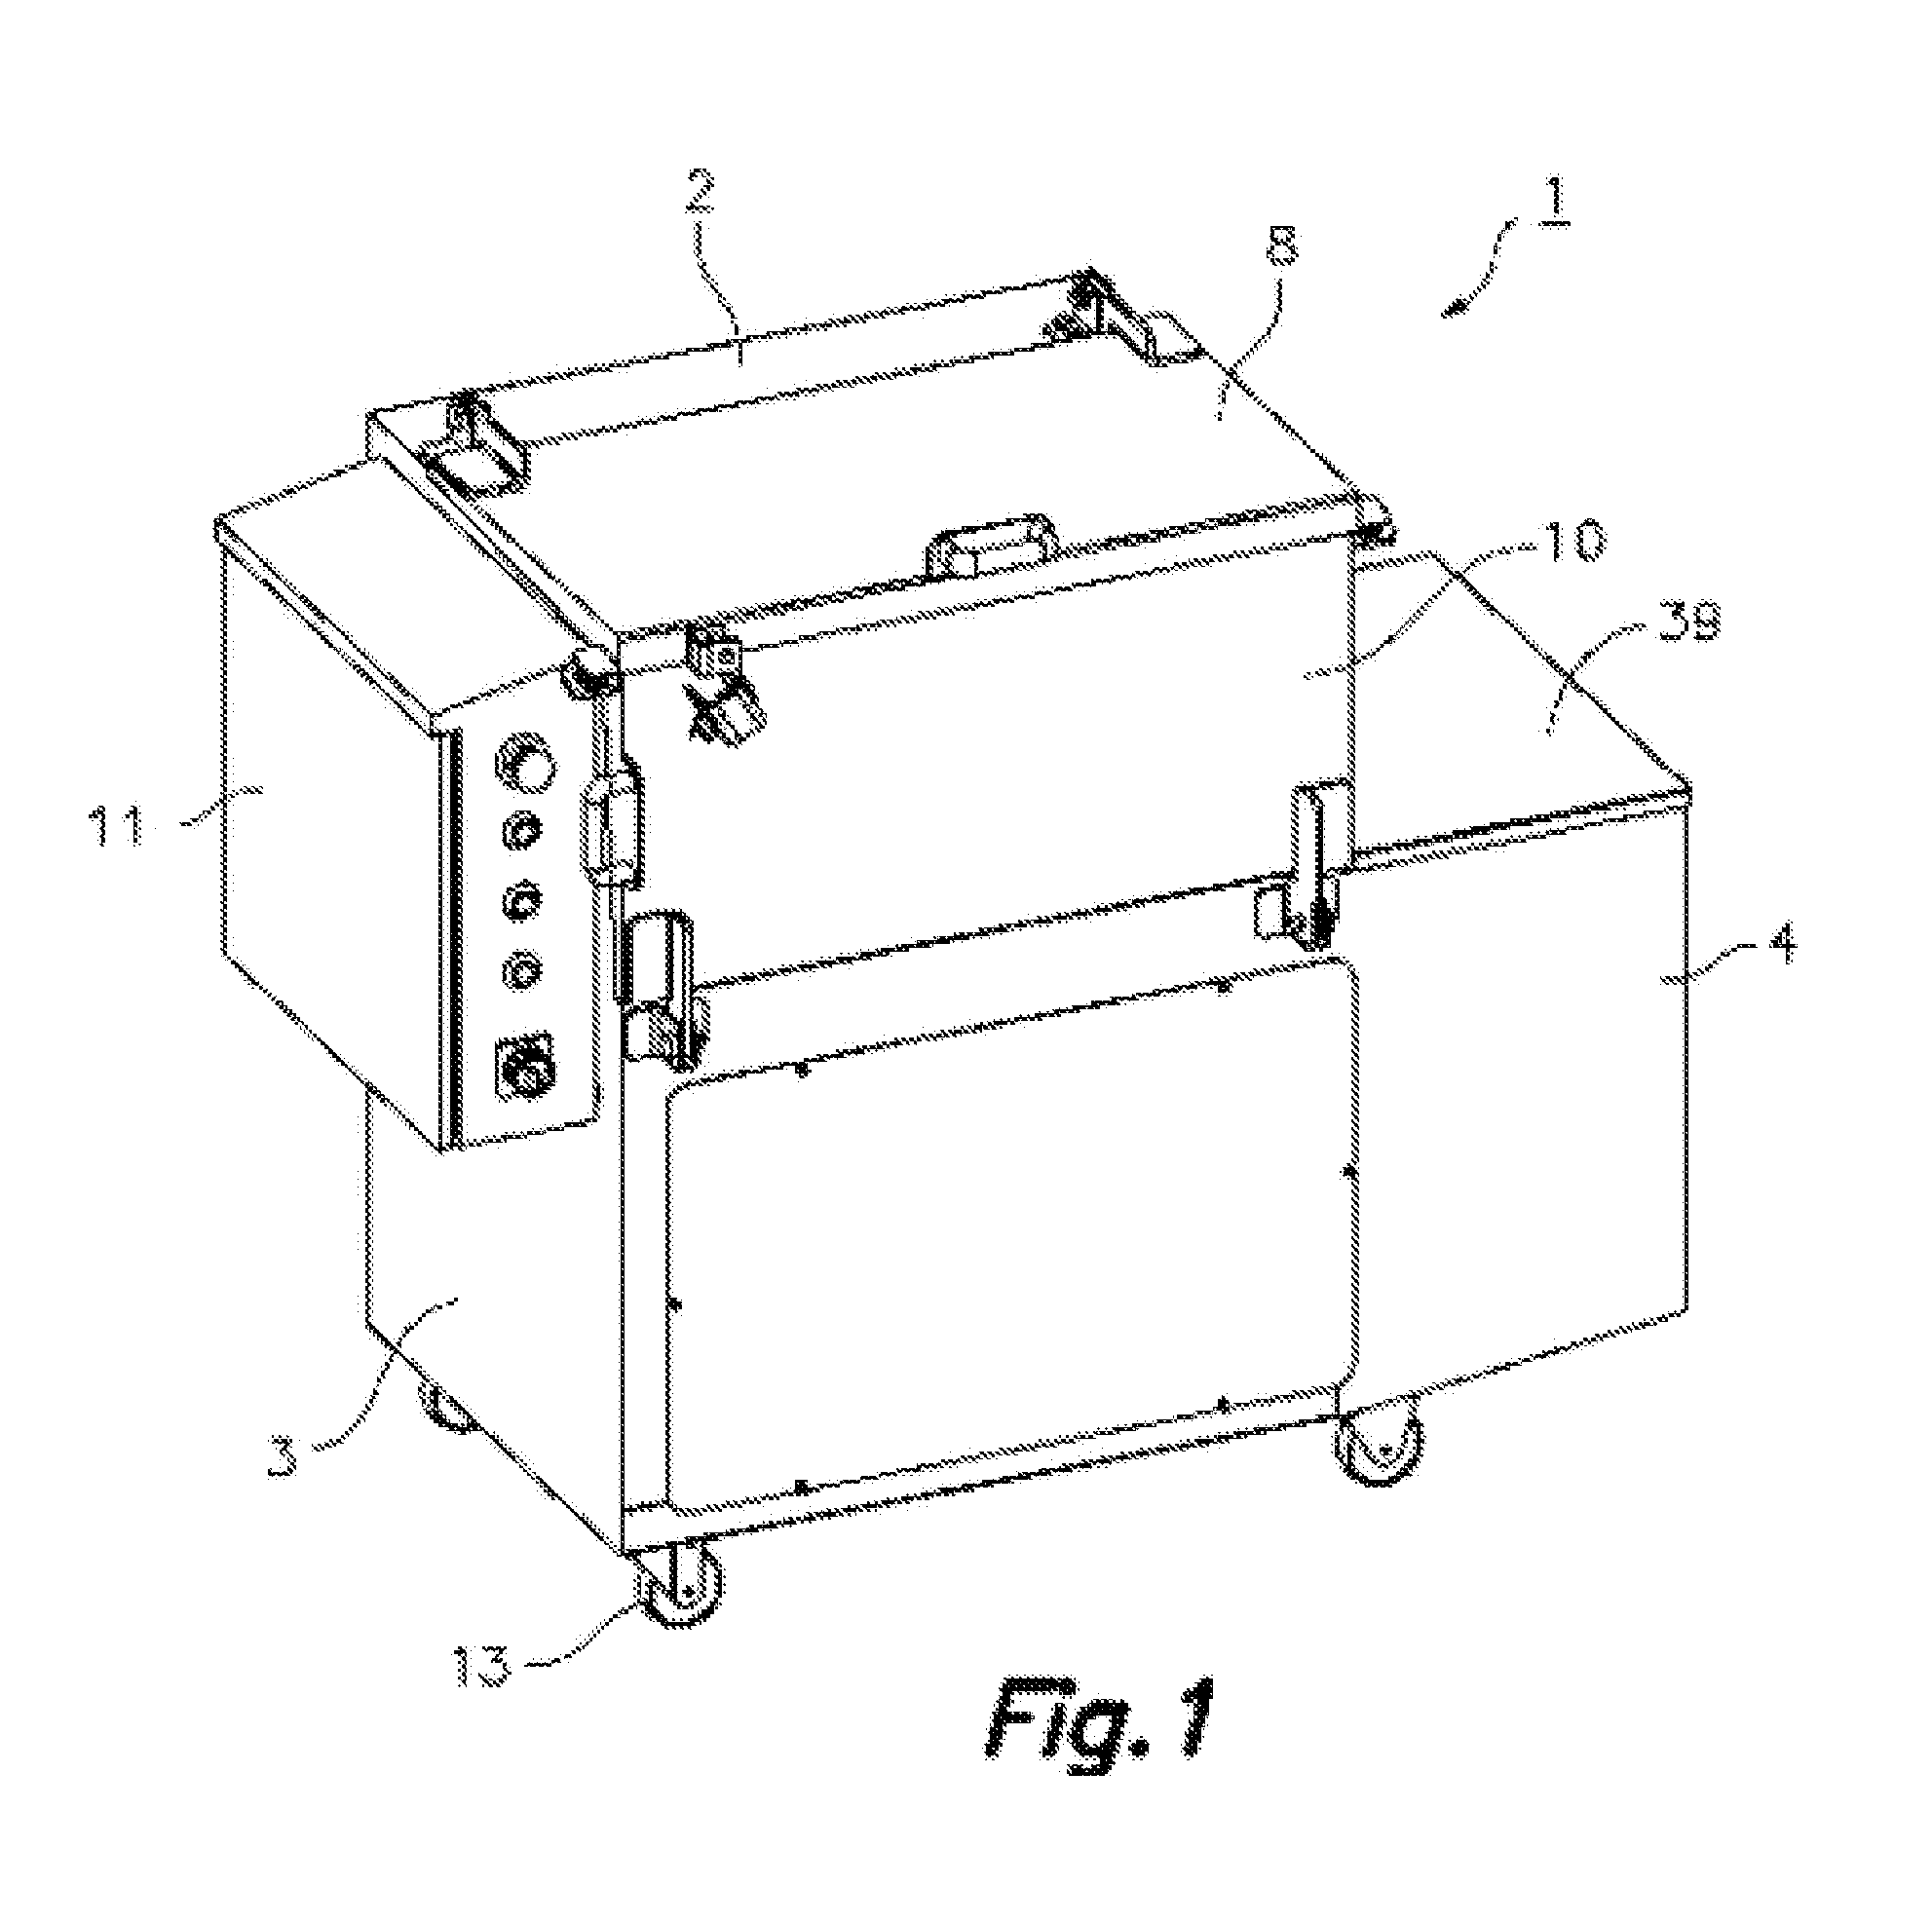 Method and machine for cleaning needles for injecting fluids into meat products